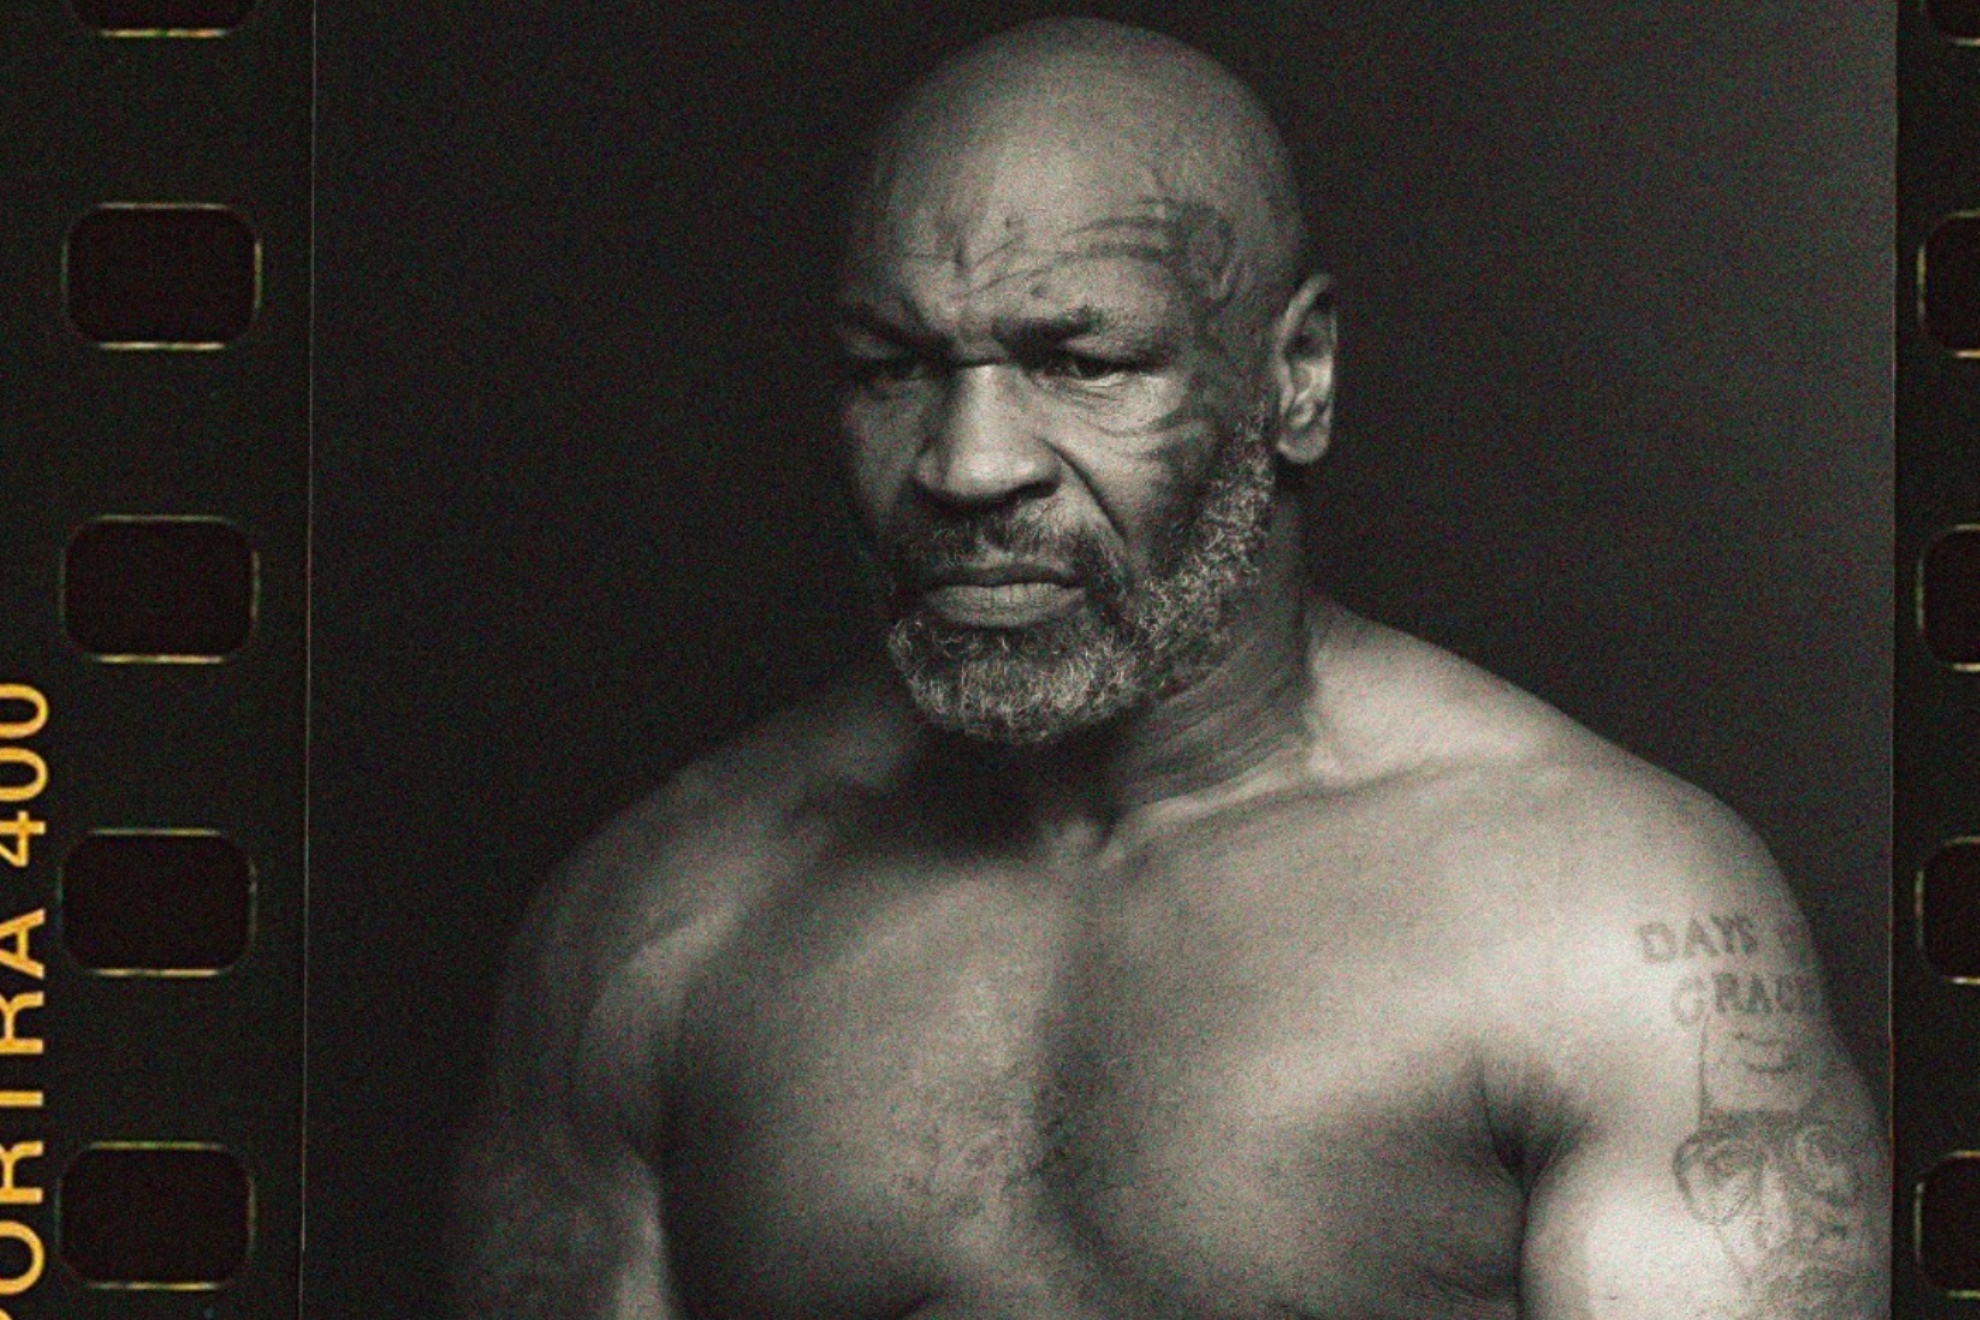 Mike Tyson showing off his physique